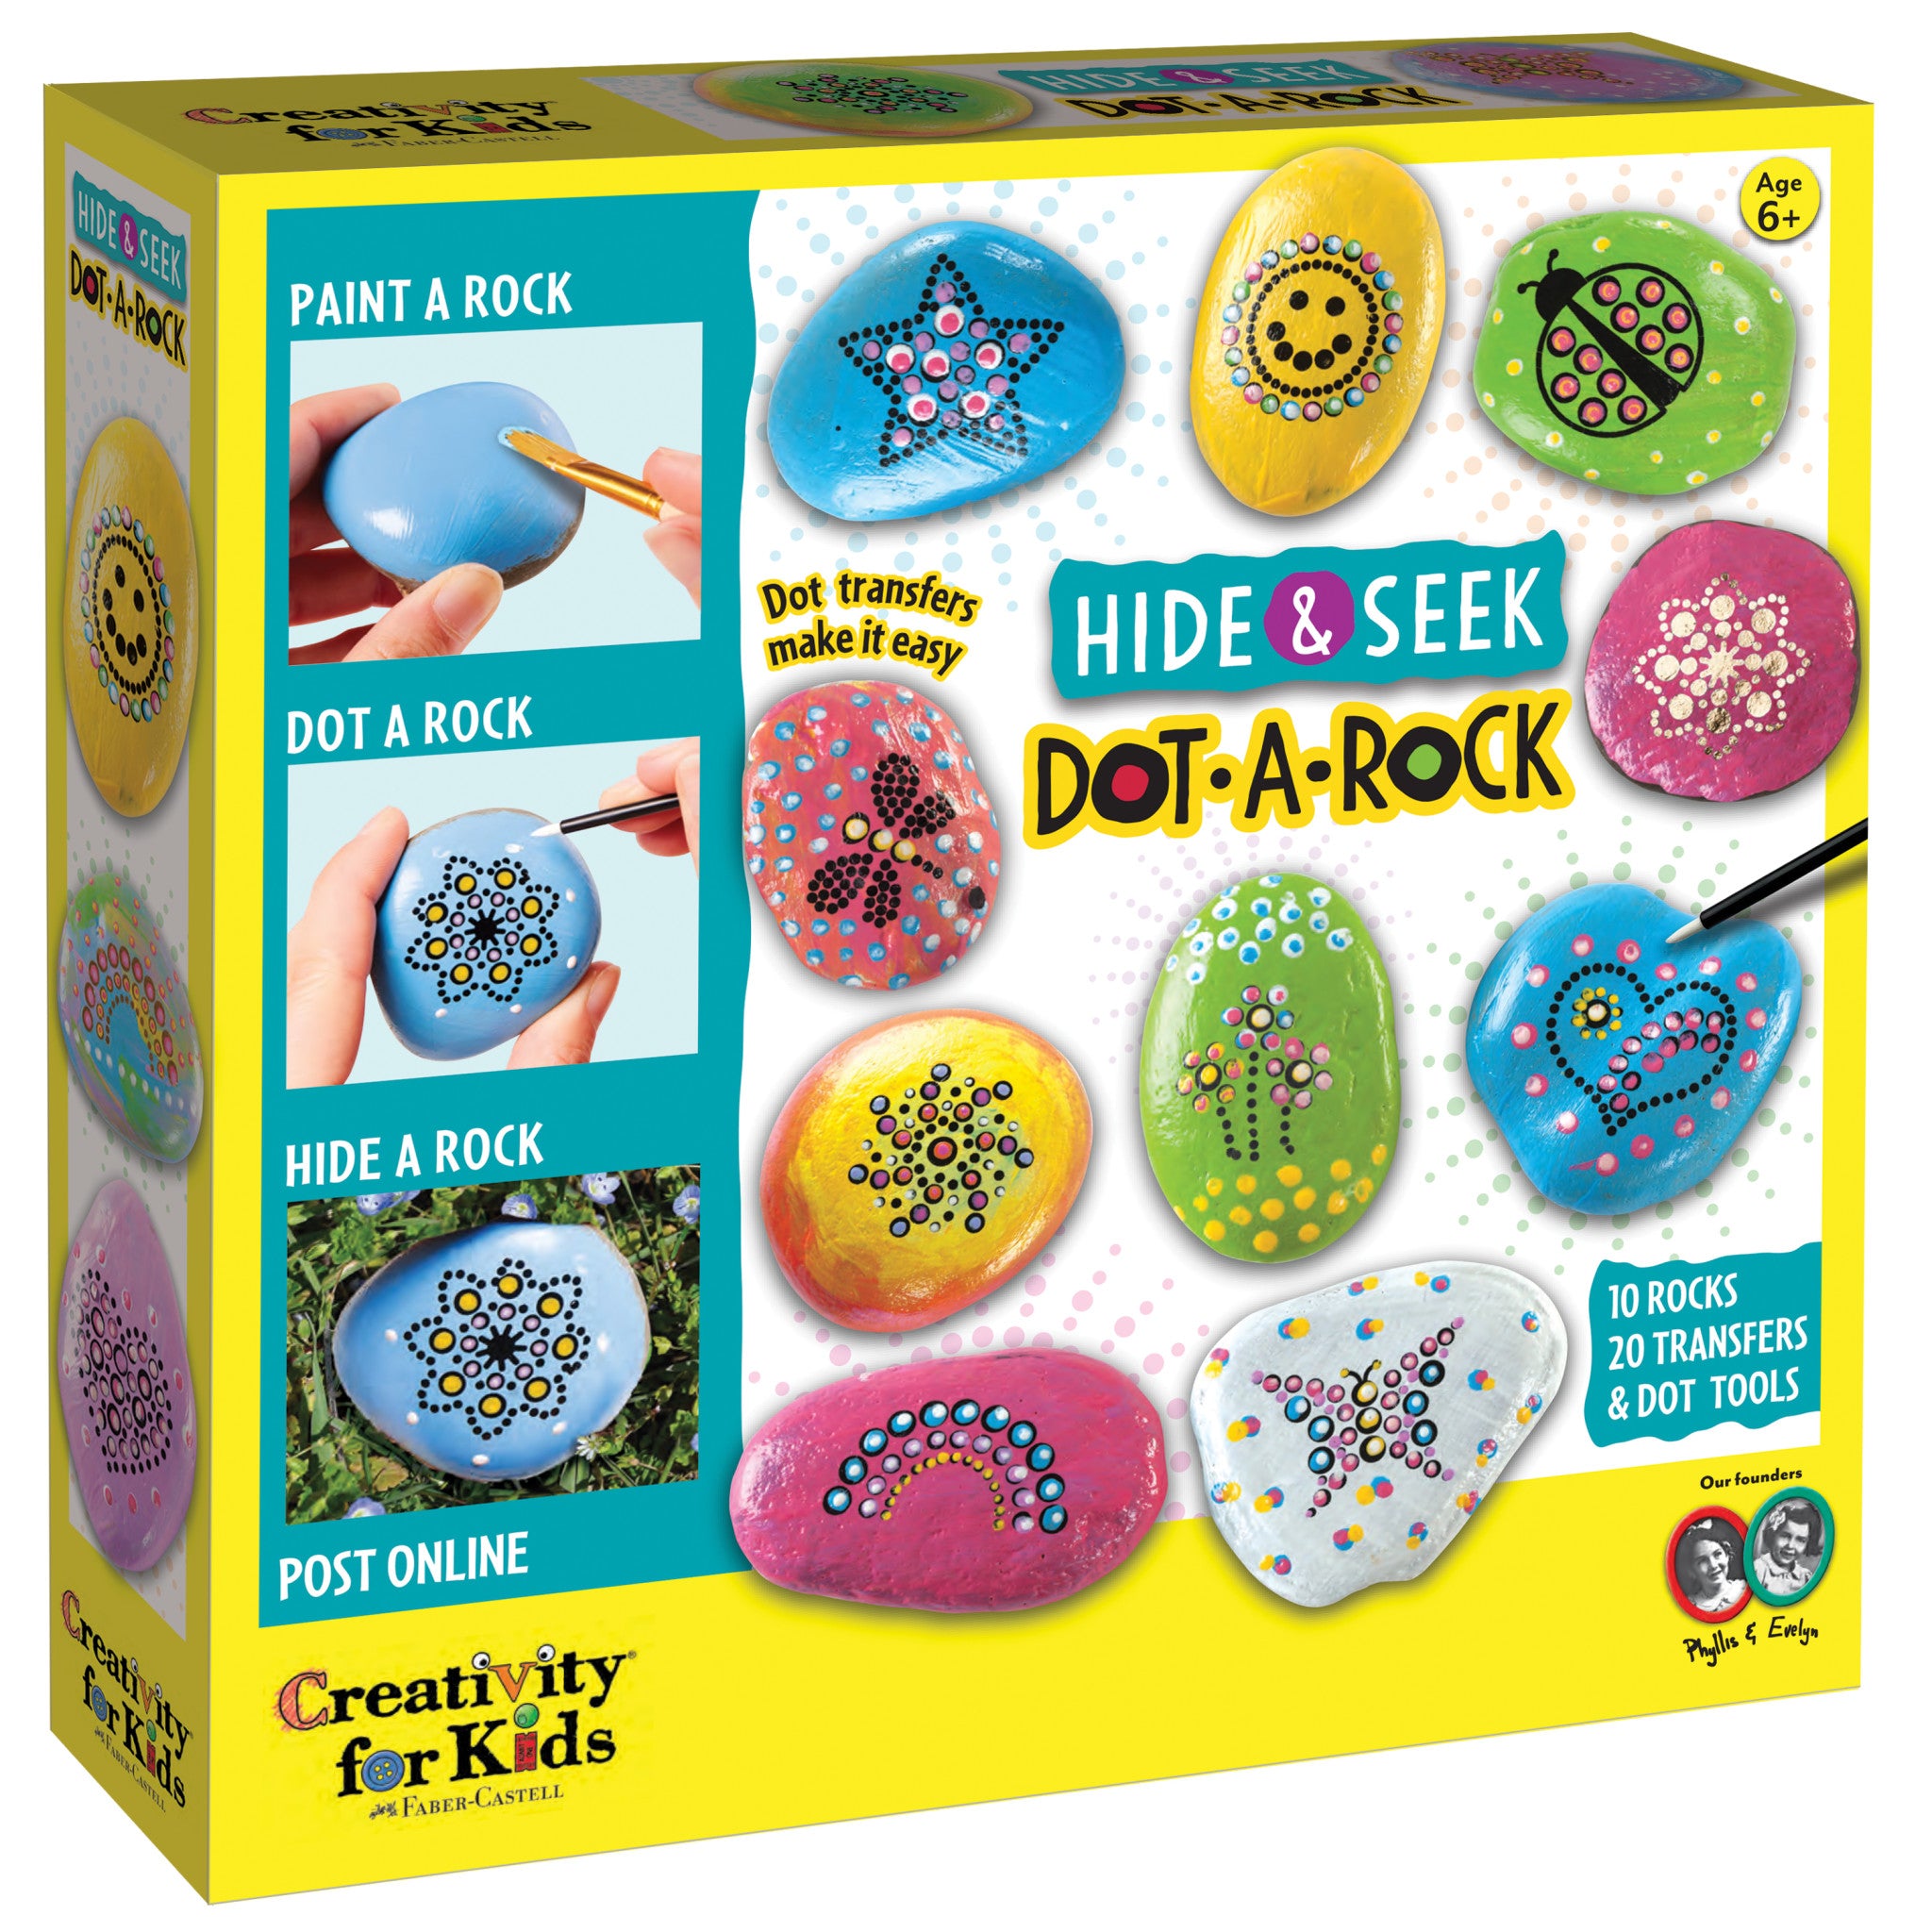 BOKIN Rock Painting Kit for Kids Ages 4-8,Hide and Seek for Kids 9